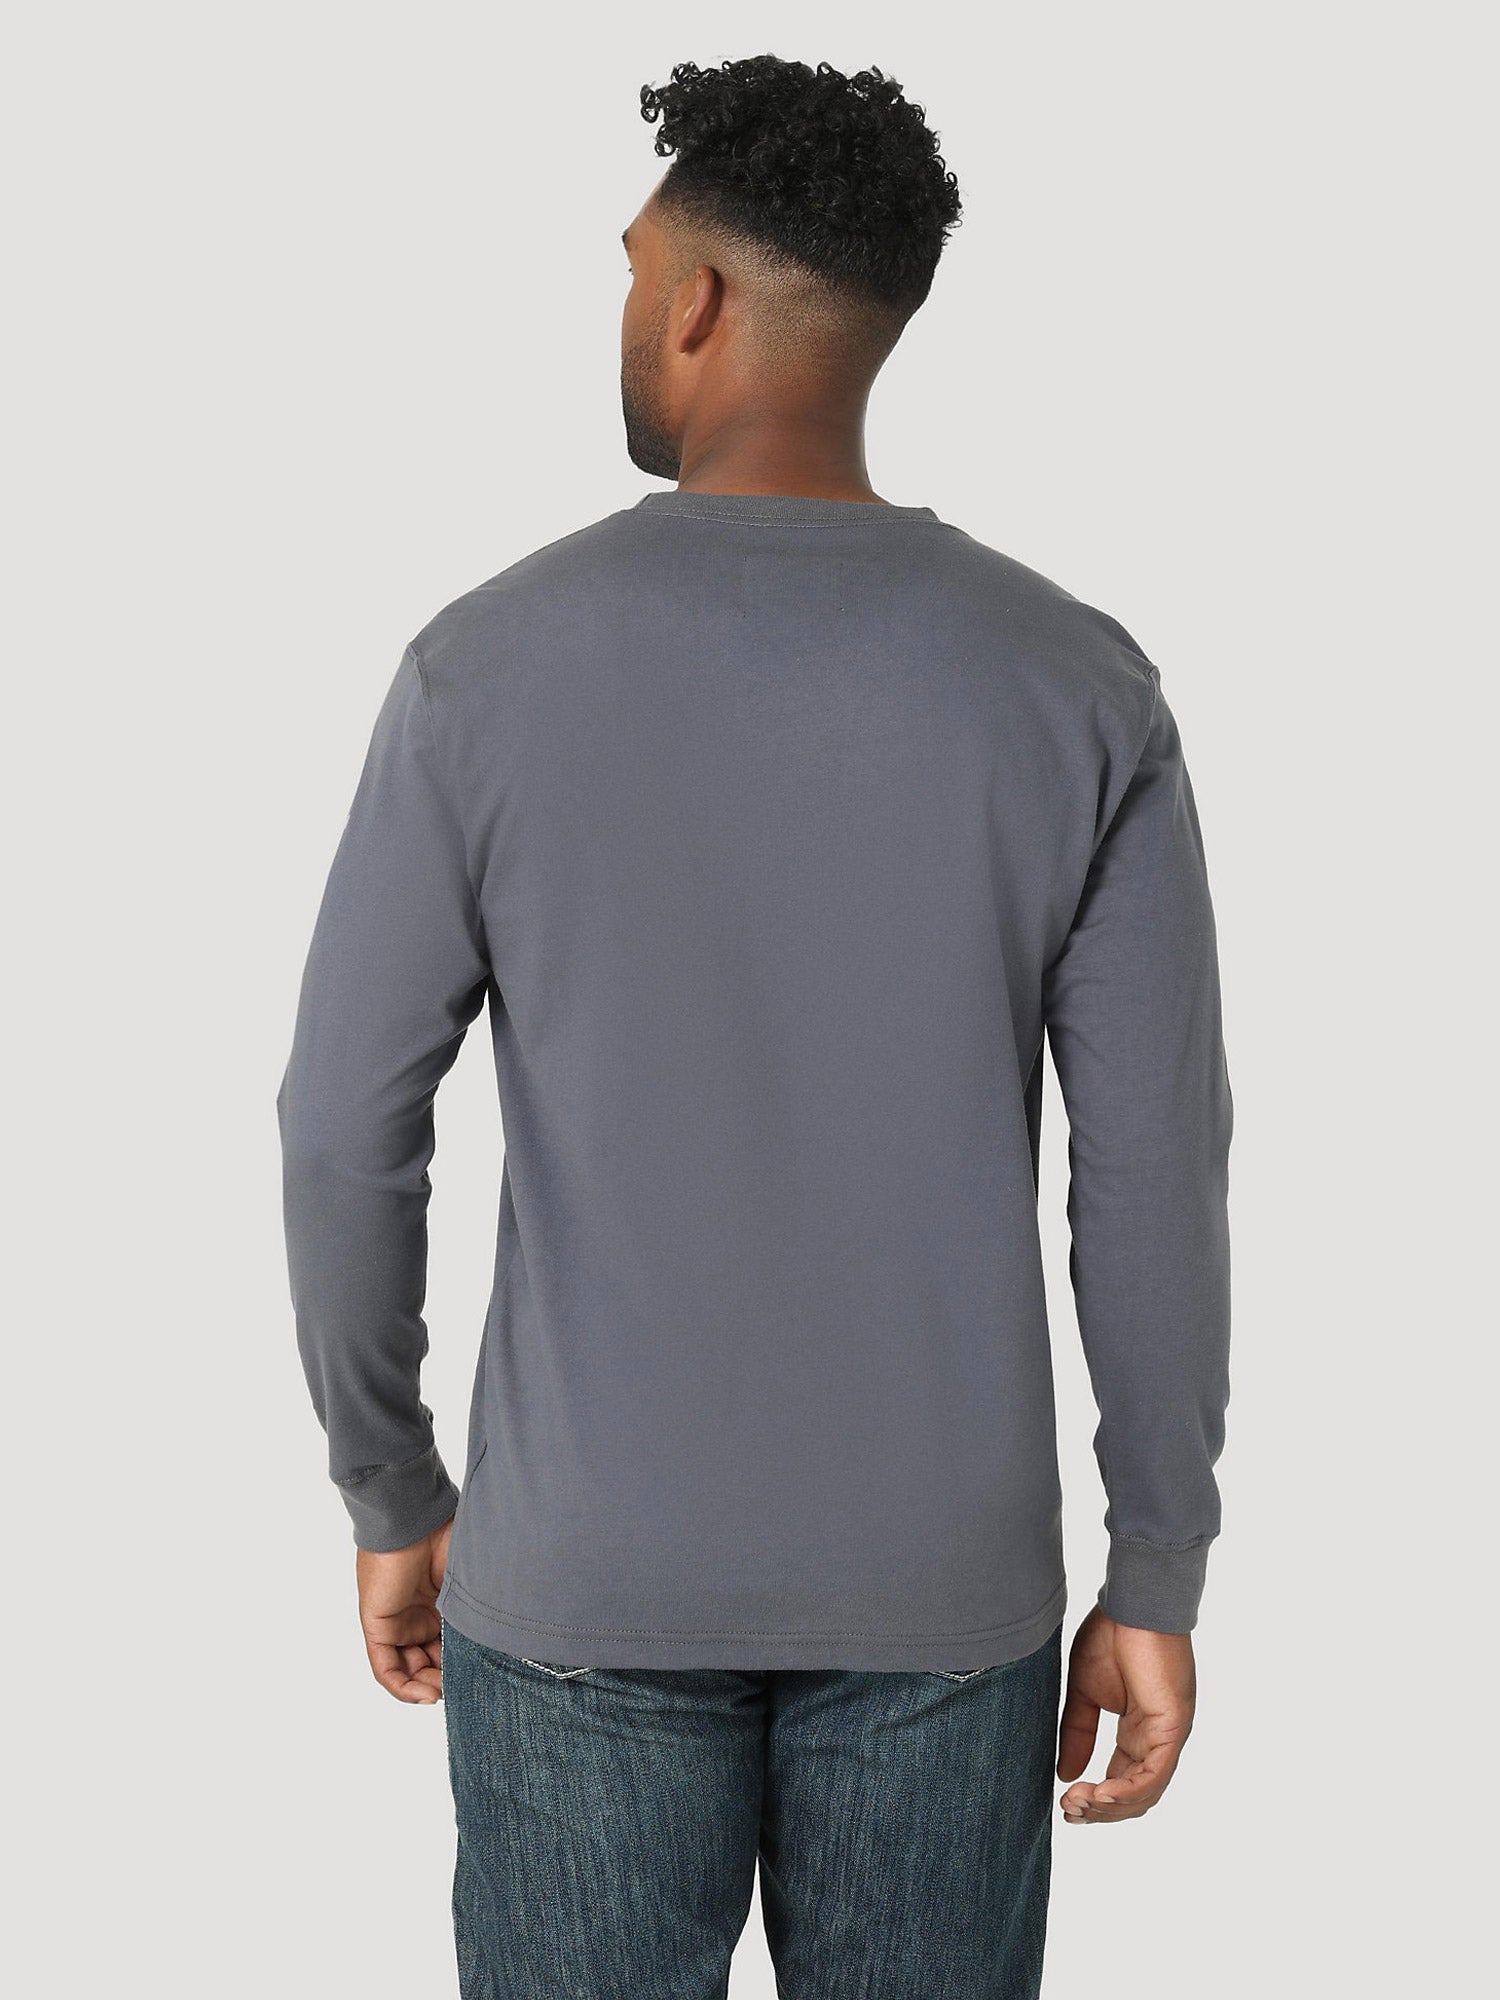 Wrangler 112317442 Flame Resistant Distressed Arm Logo Graphic Long Sleeve T-Shirt in Castle Rock Back View